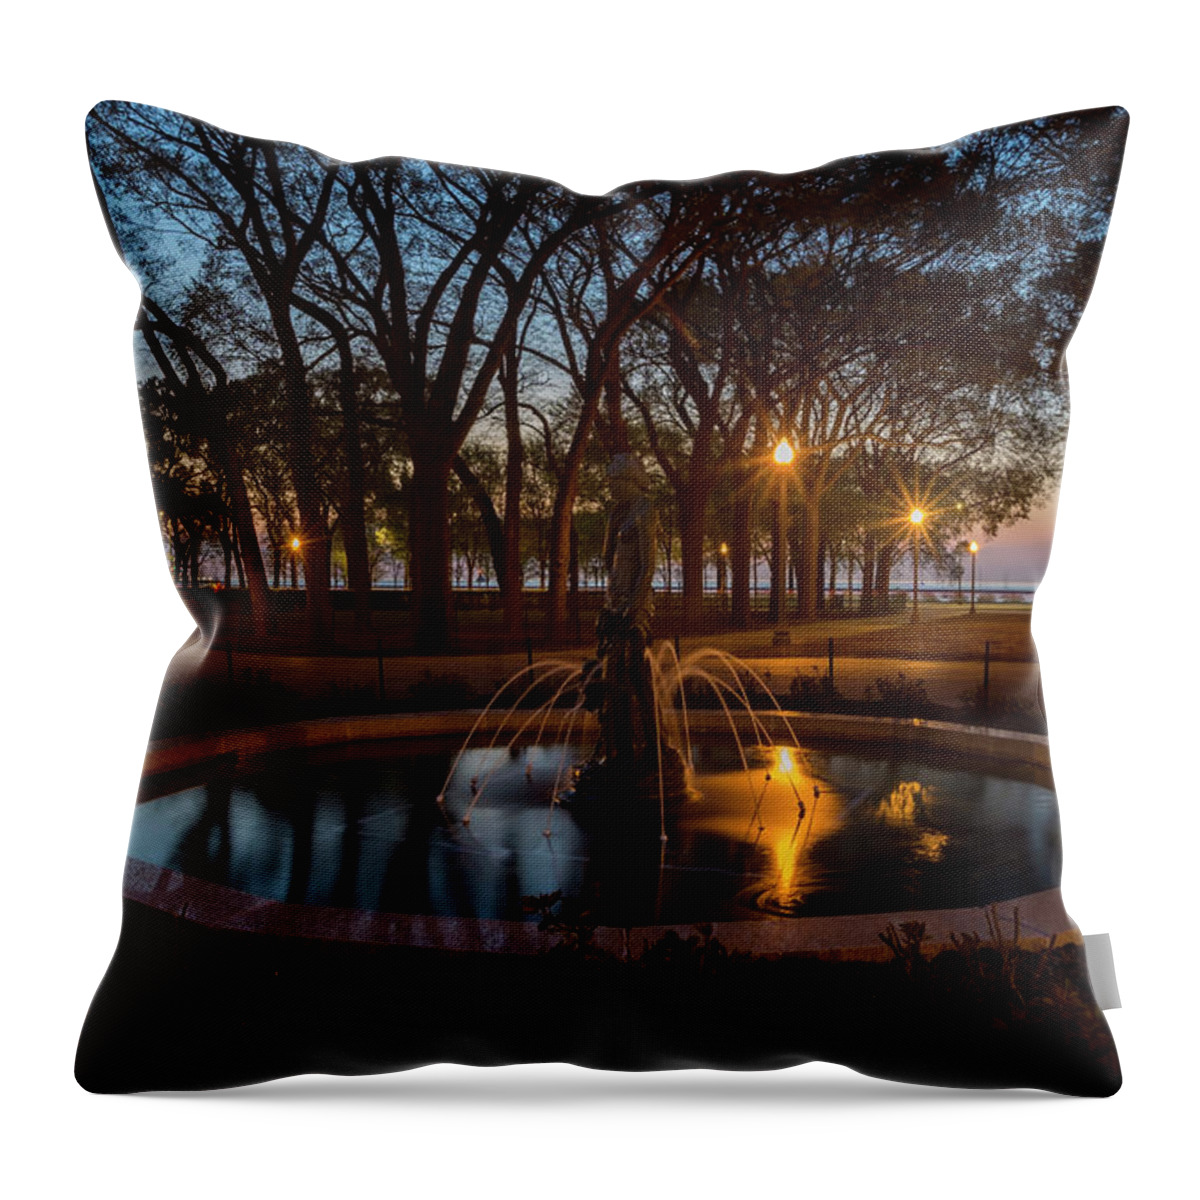 Grant Park Throw Pillow featuring the photograph Grant park scene at dawn by Sven Brogren